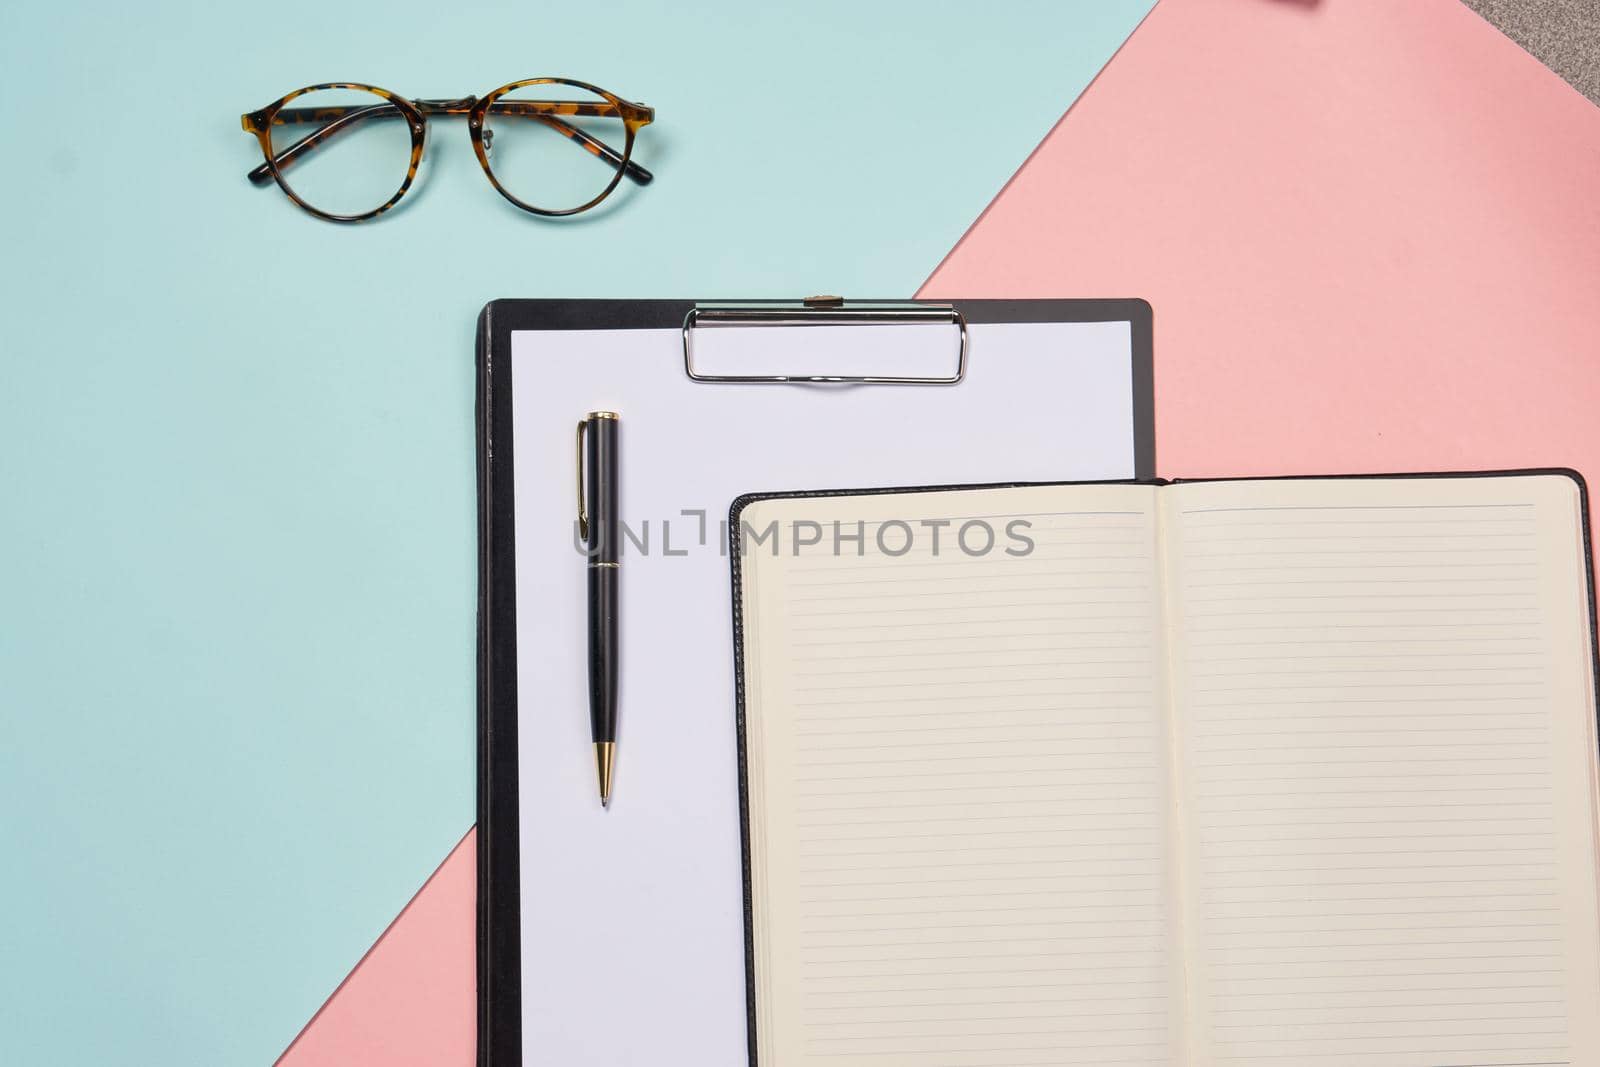 accessories office supplies notepad close-up business. High quality photo